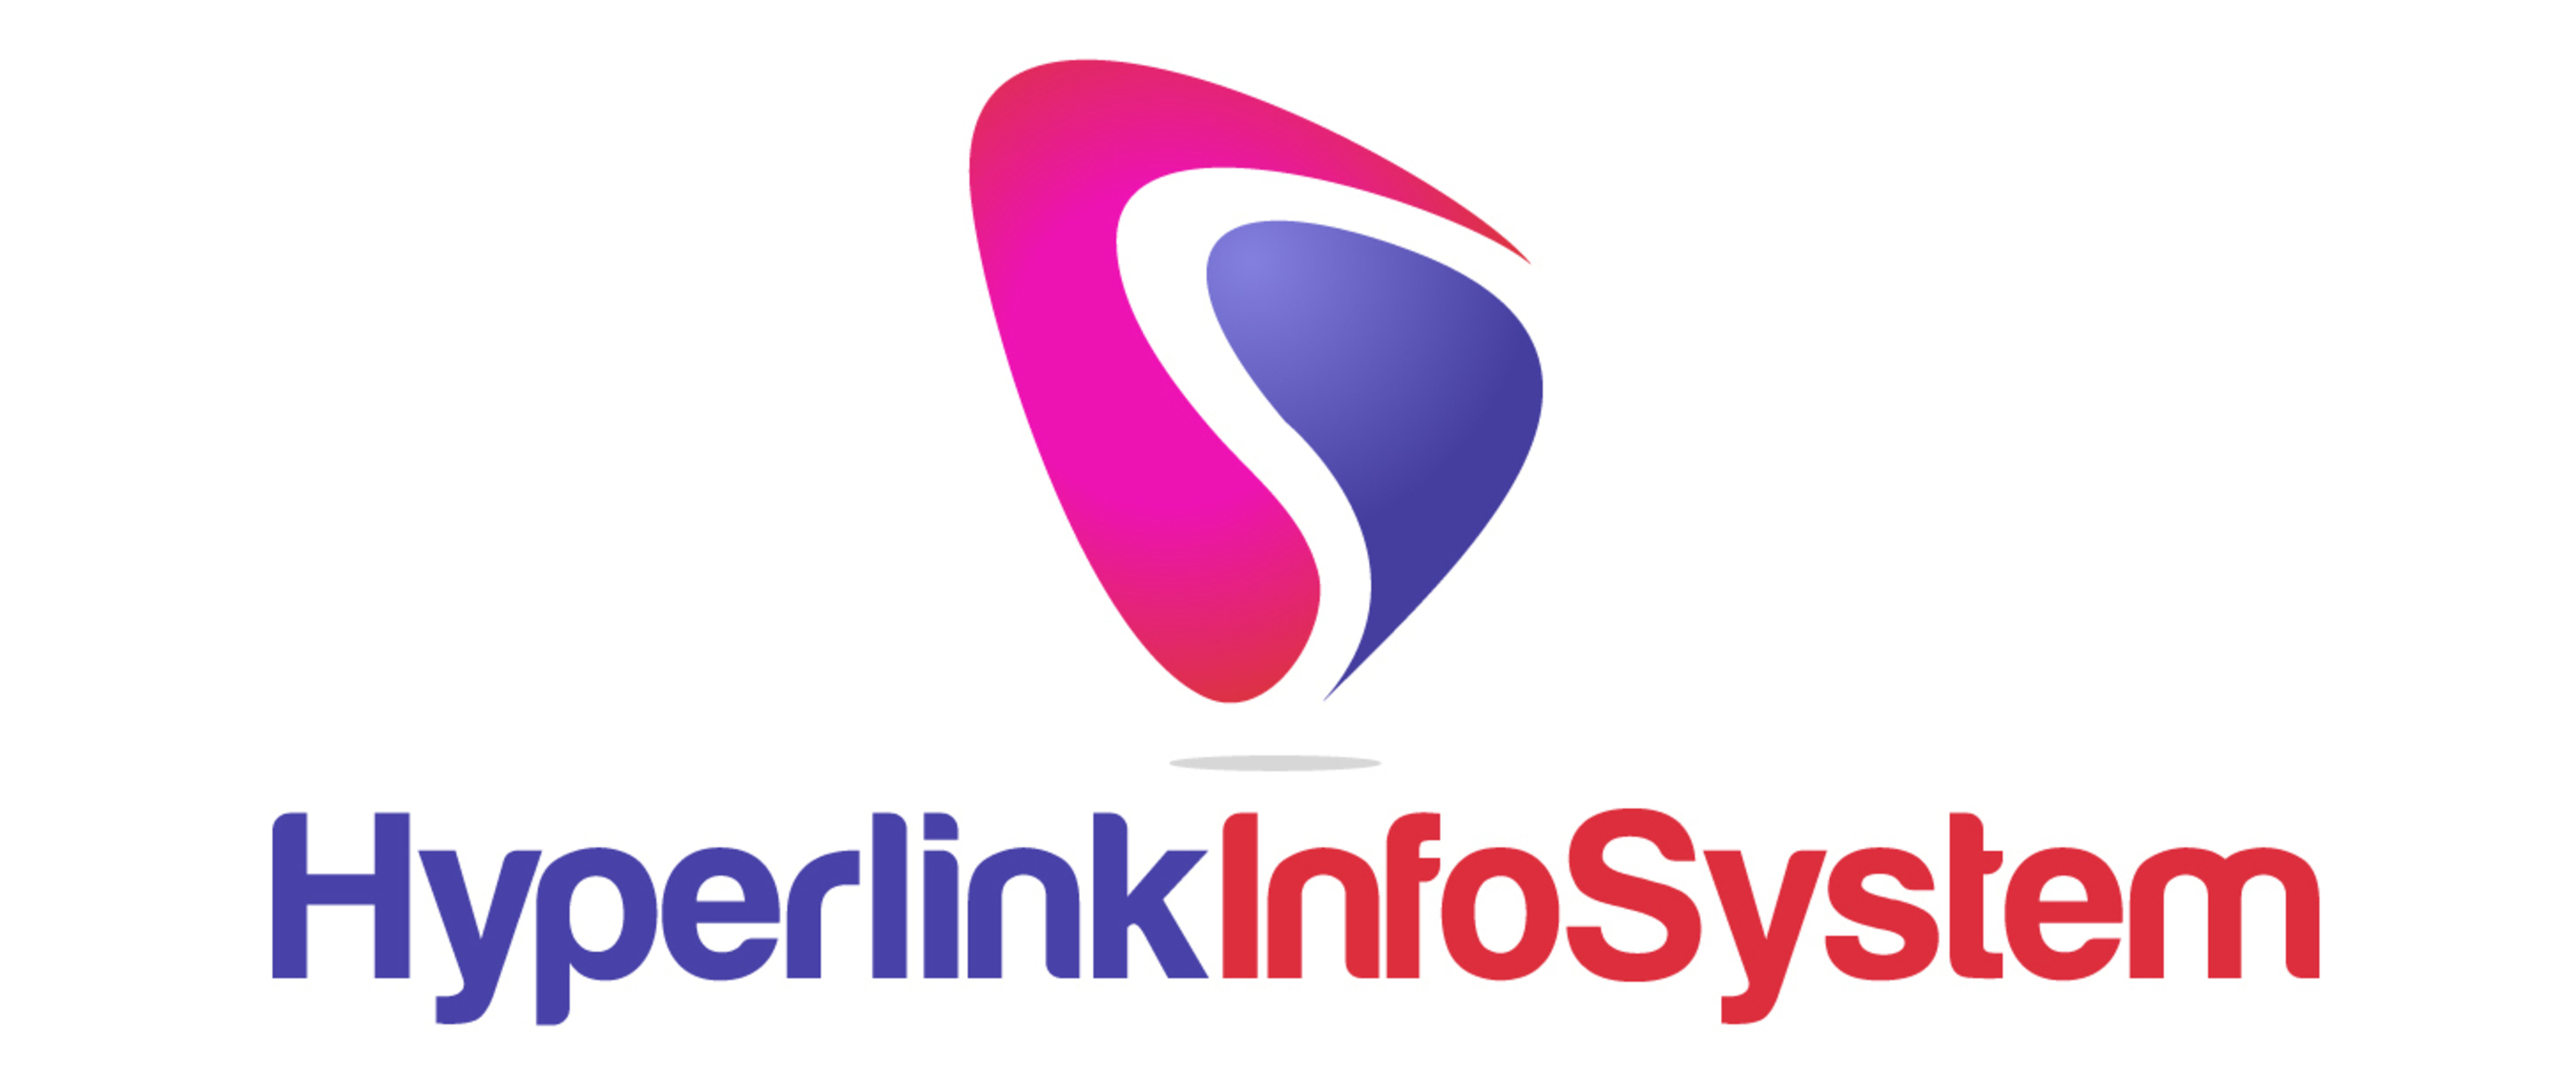 Mobile App Development Company's Hyperlink Information System Reveals Cost and Time to Build an App in 2018